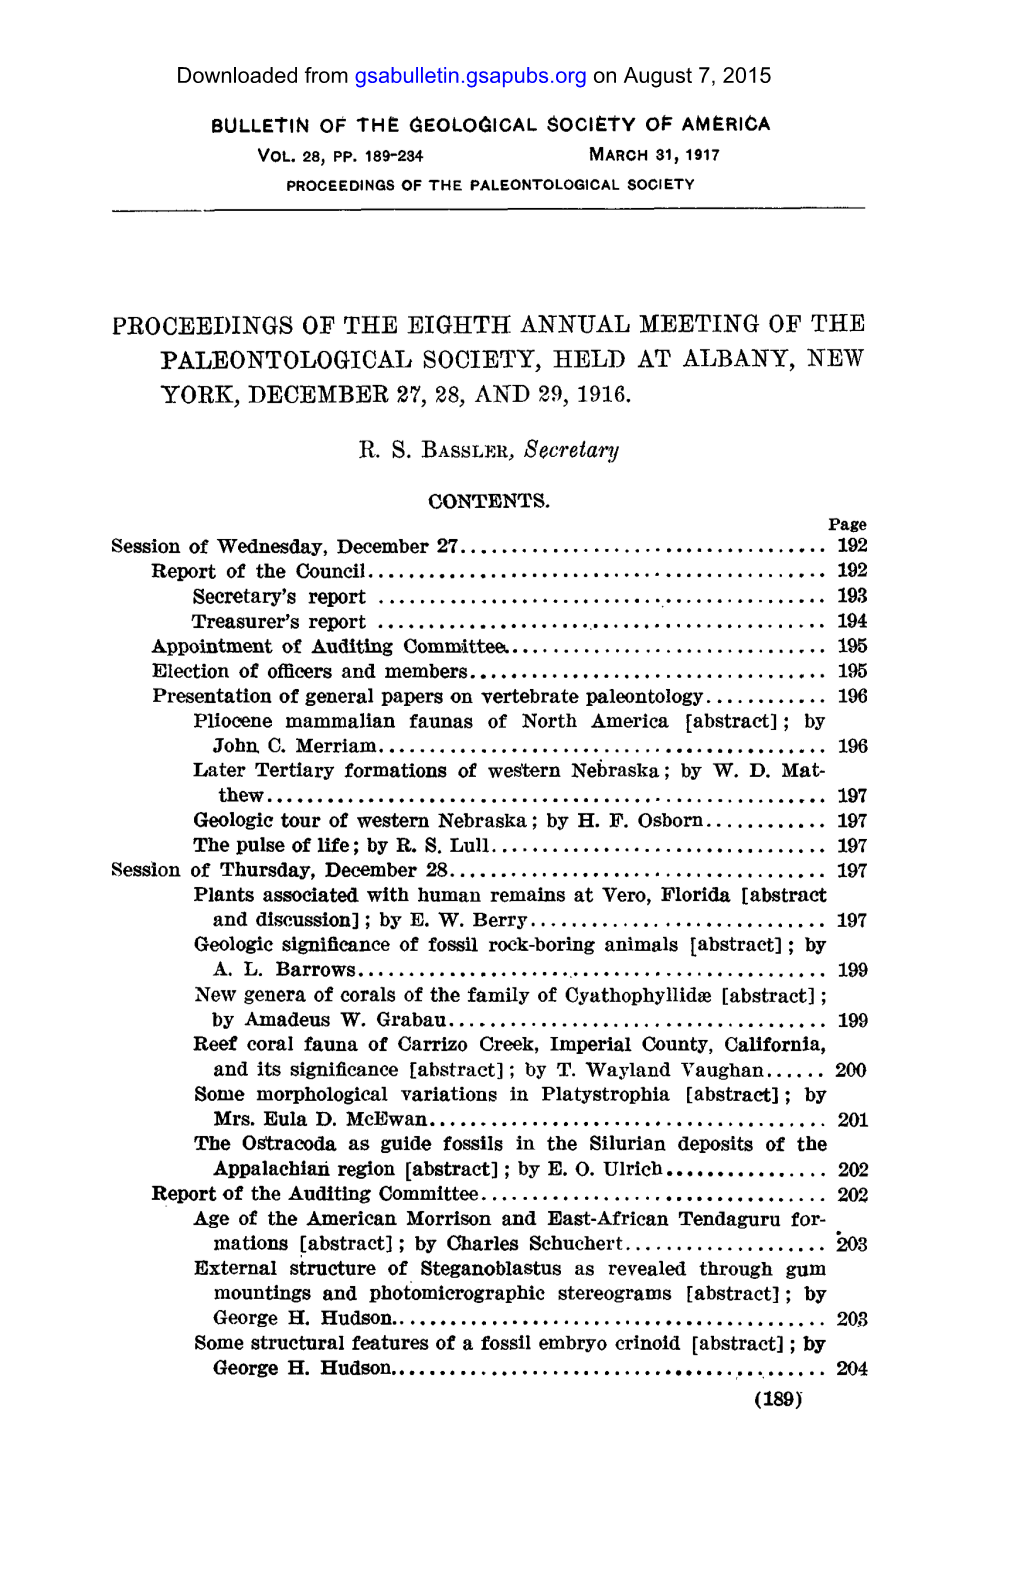 Proceedings Op the Eighth Annual Meeting of the Paleontological Society, Held at Albany, New Yoke, December 27, 28, and 29, 1916